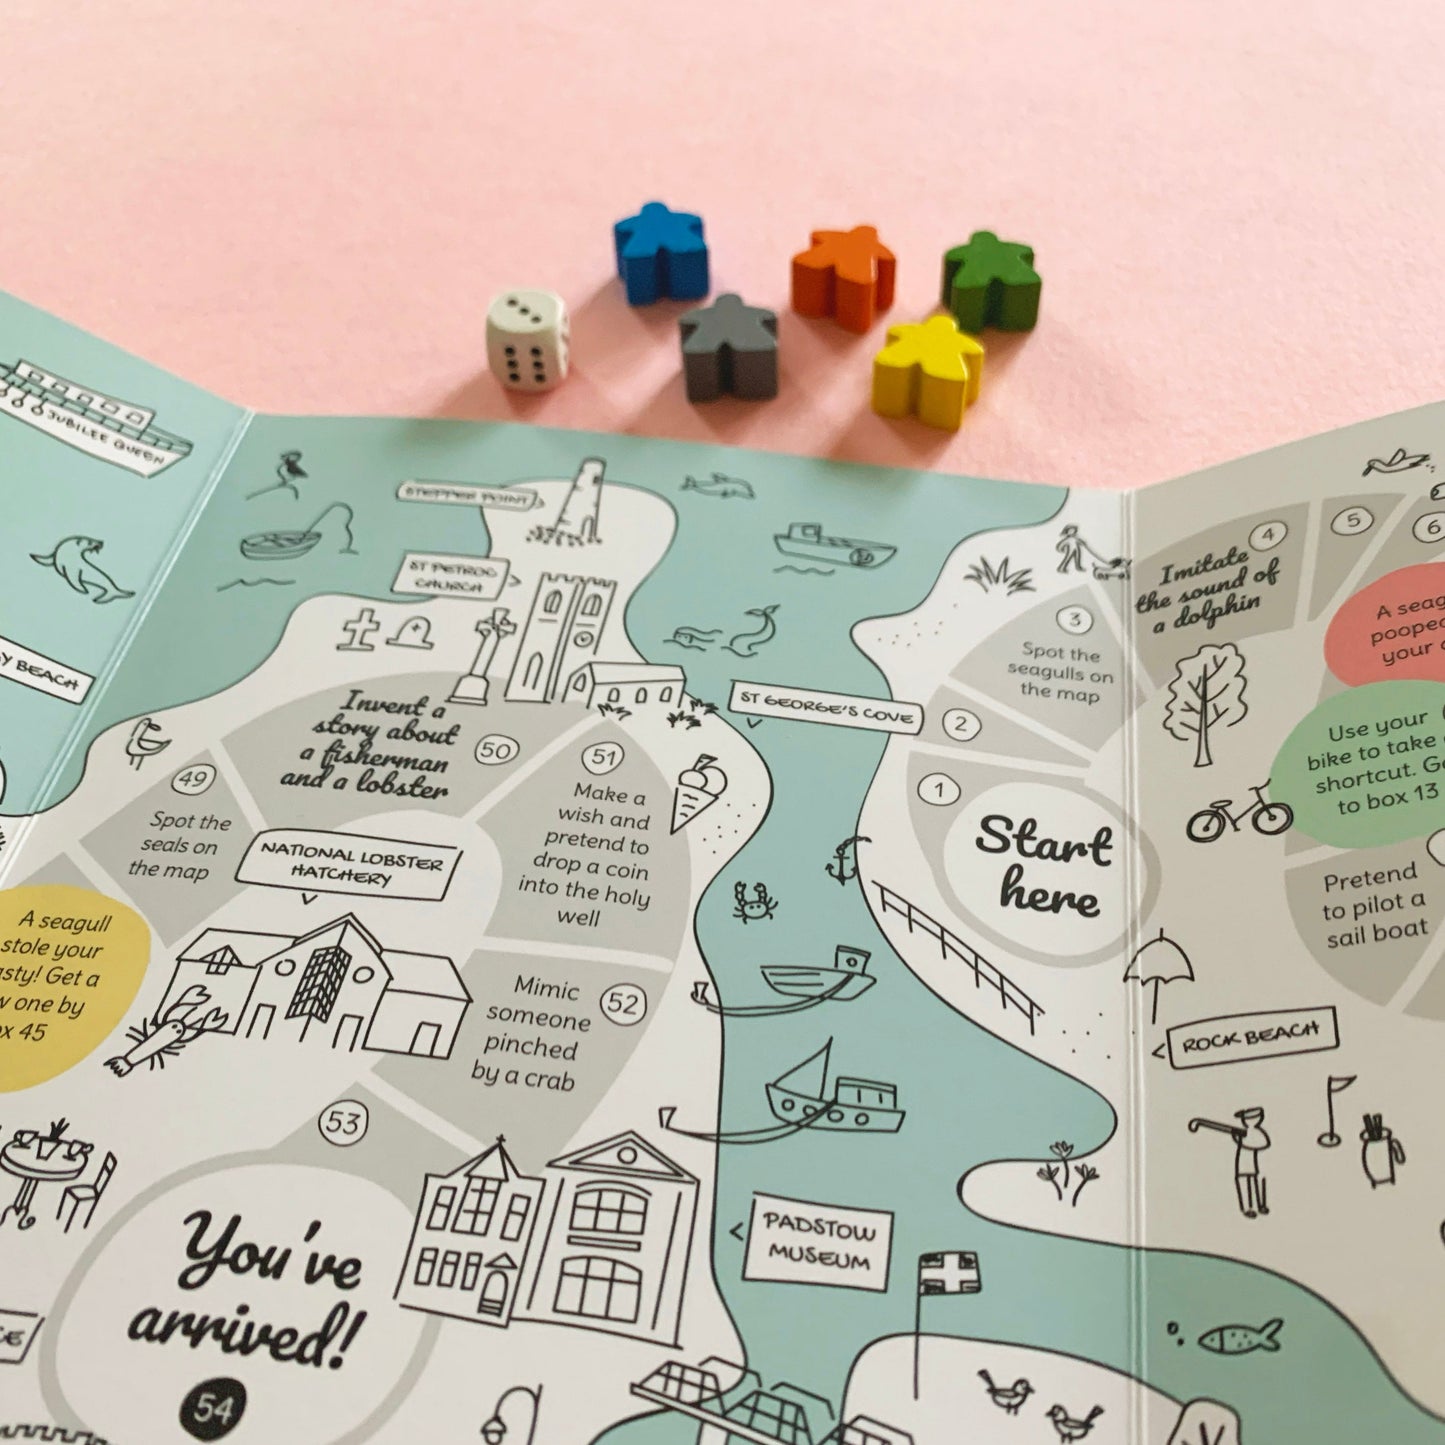 Padstow board game